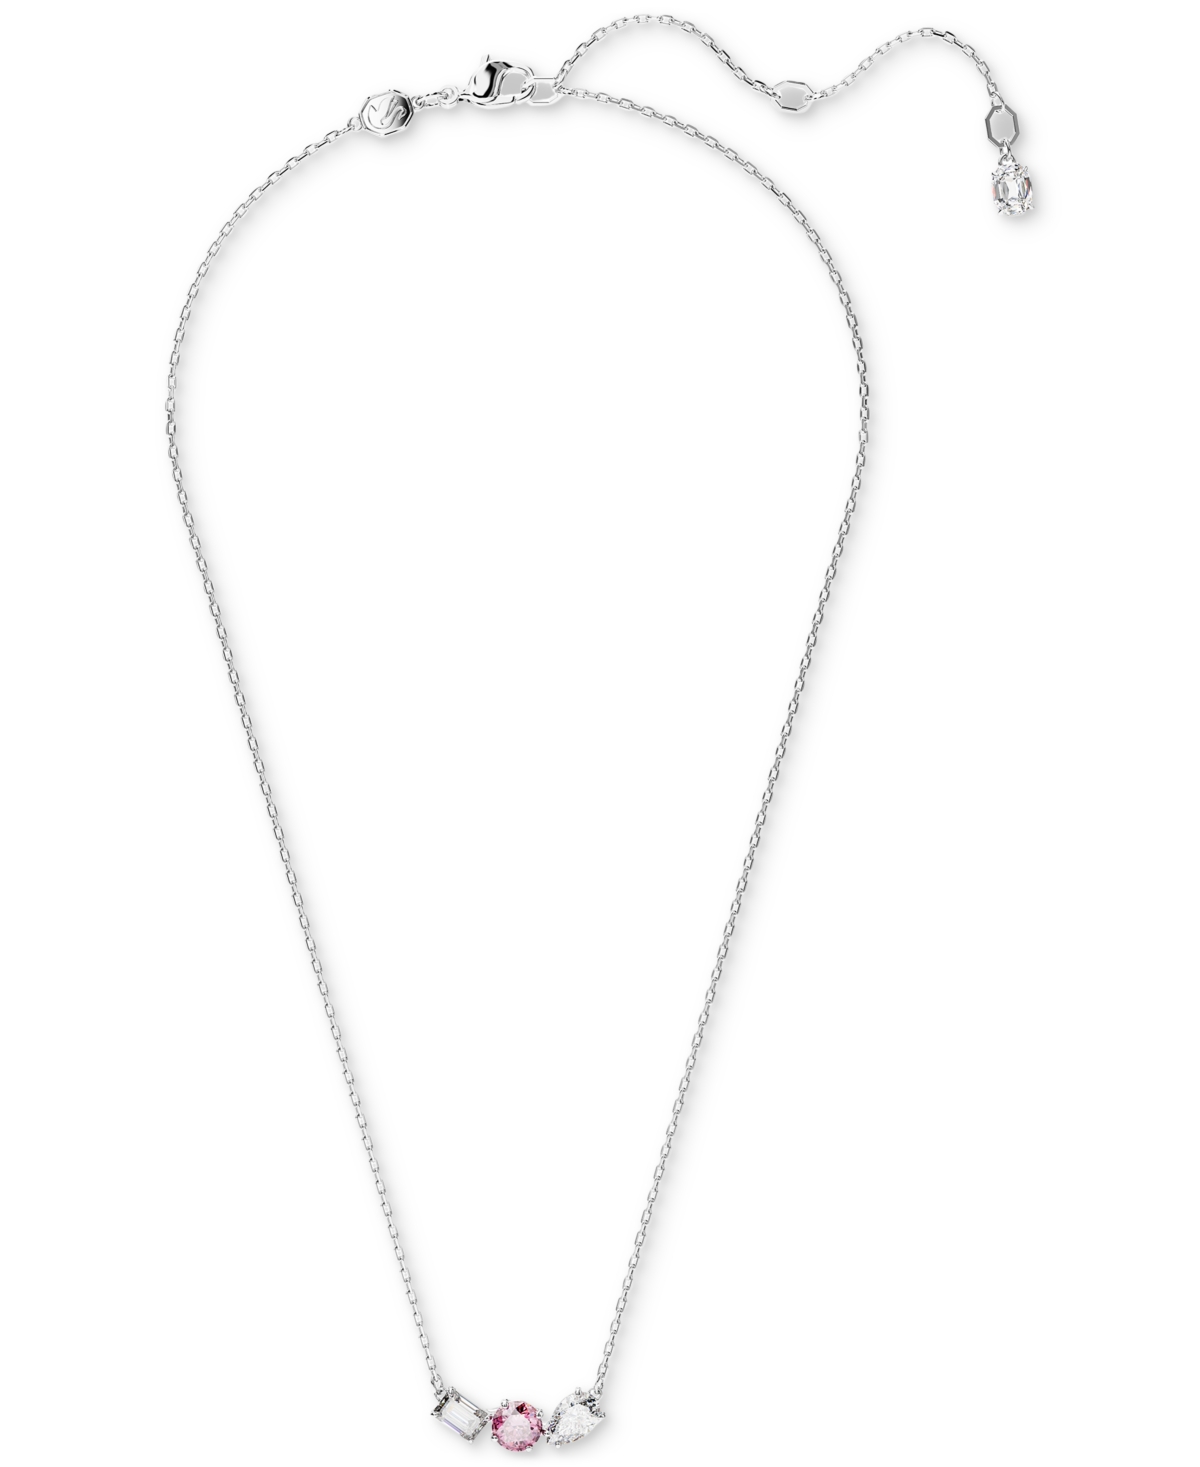 Swarovski Rhodium-plated Mixed Crystal Pendant Necklace, 15" + 2-3/4" Extender In Pink